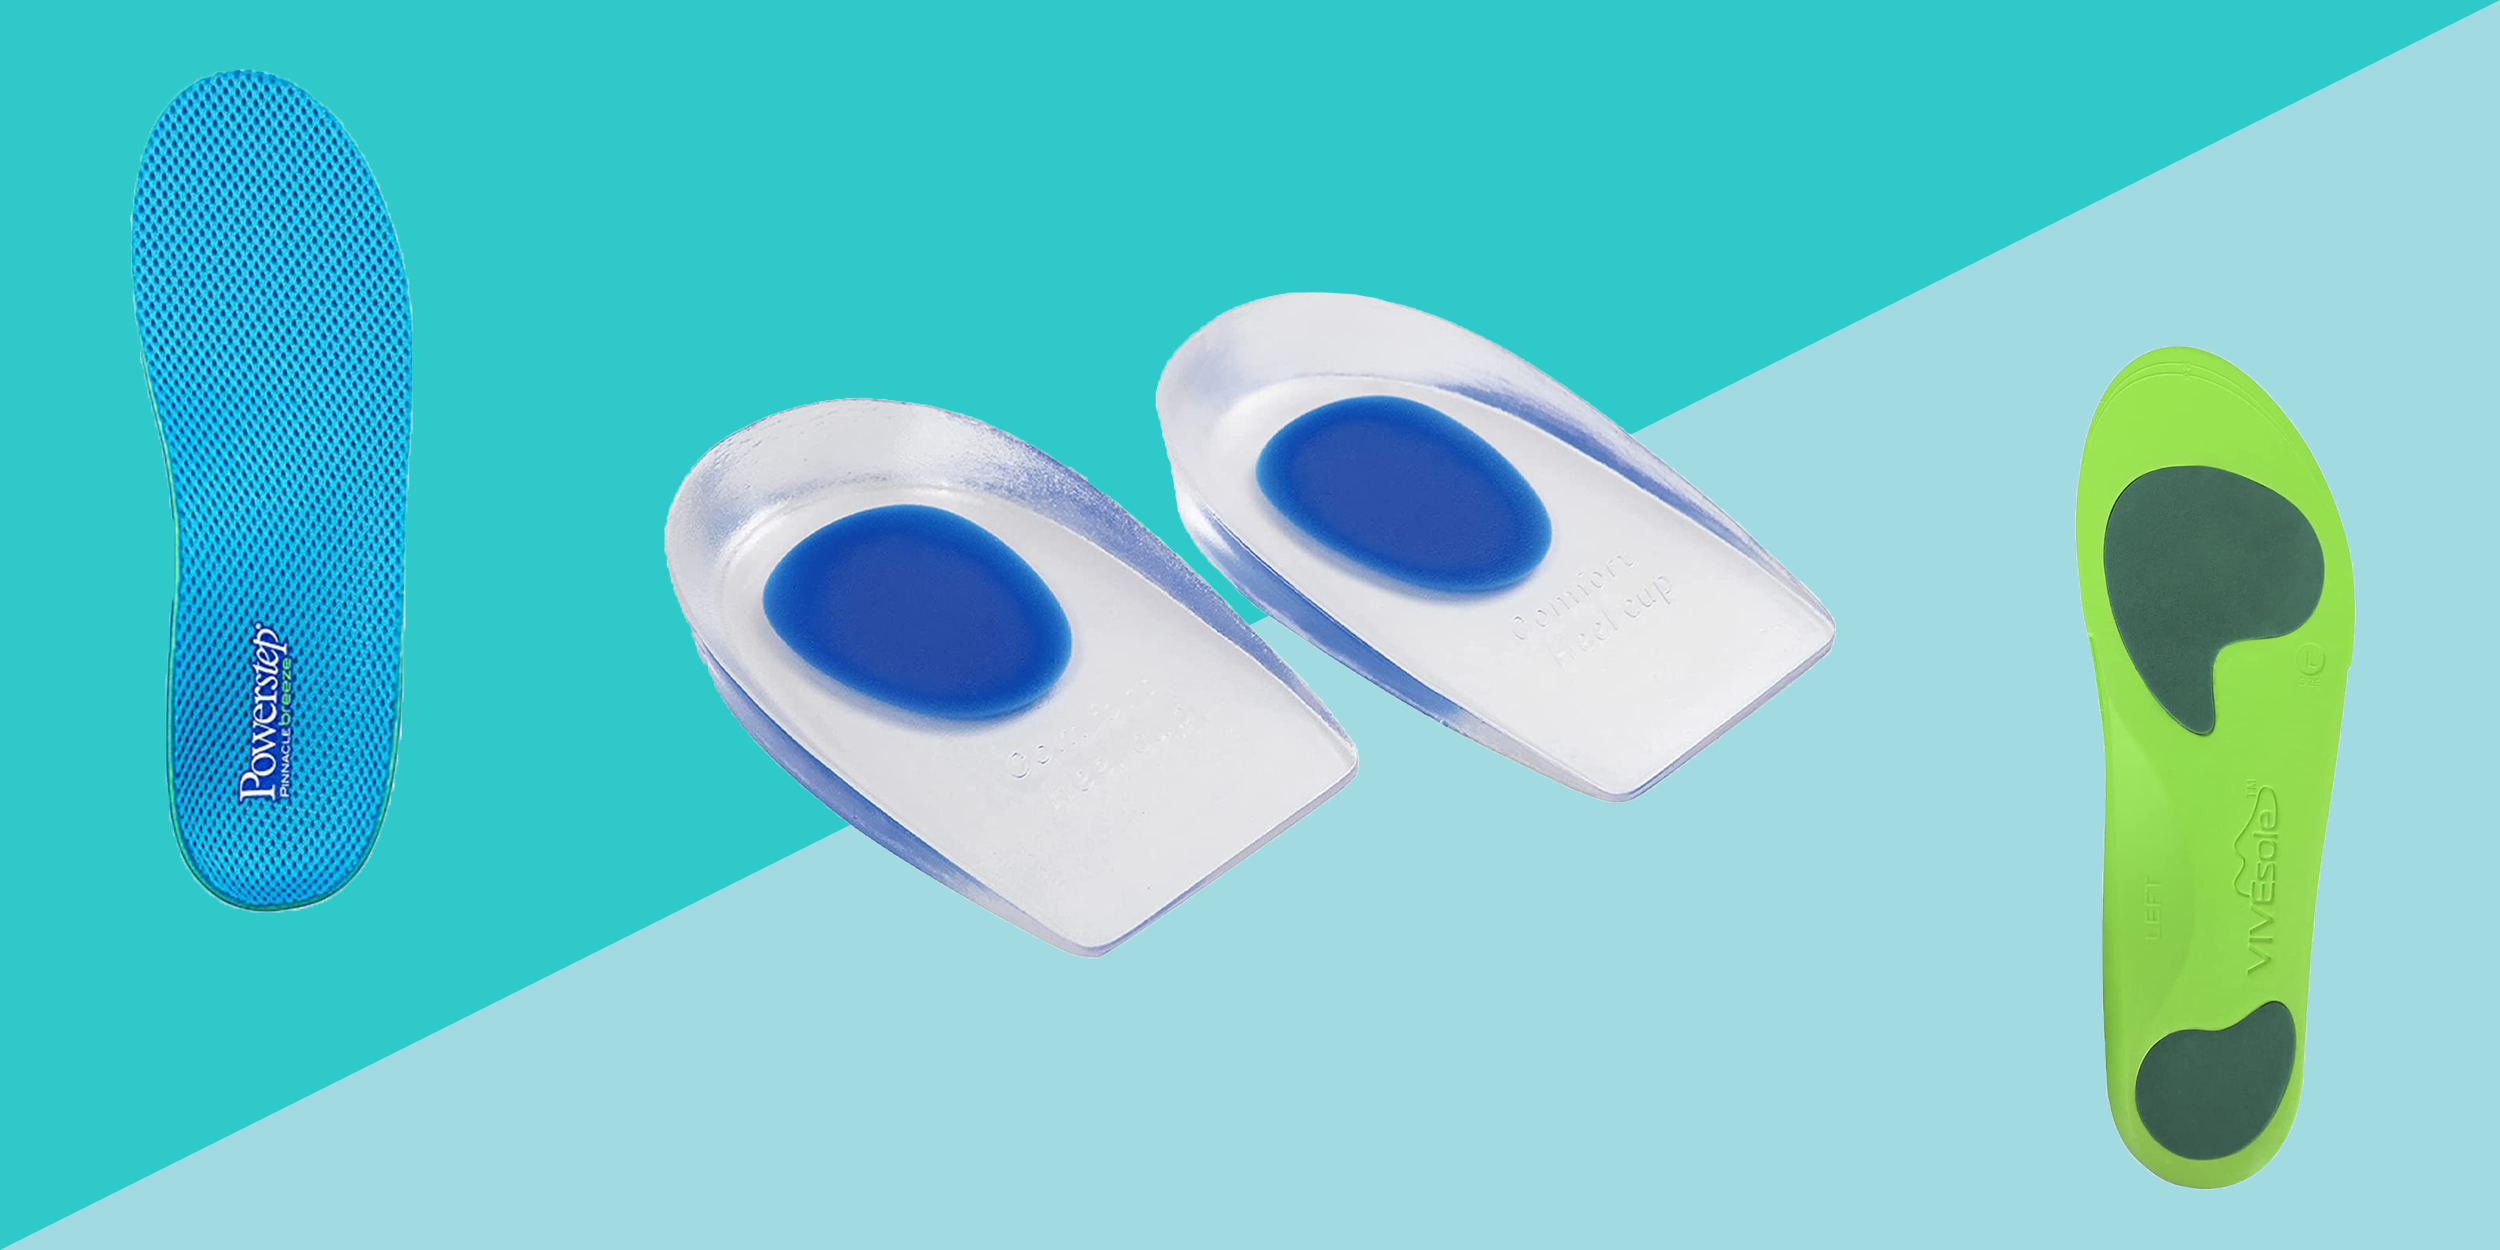 Foot Pain Plantar Fasciitis Feet Insoles Arch Supports Orthotics Inserts Relieve Flat Feet High Arch 